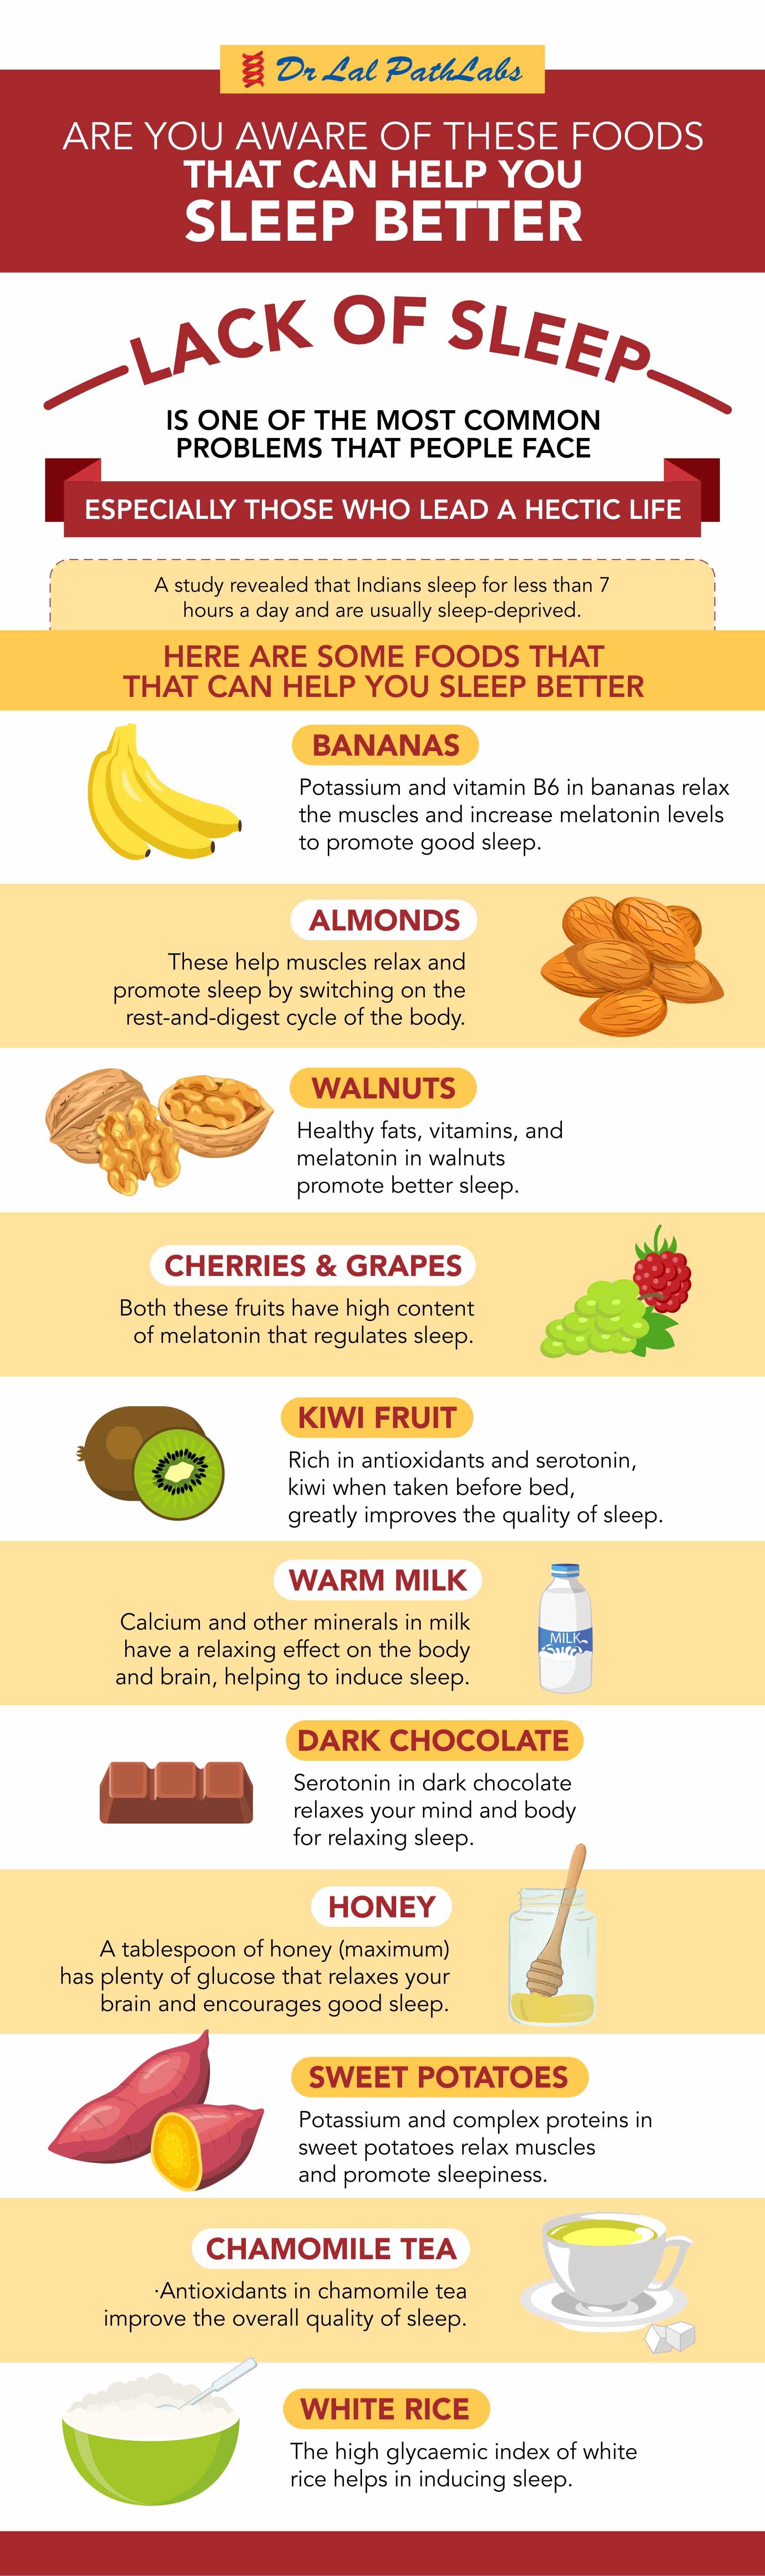 Are you aware of these foods that can help you sleep better